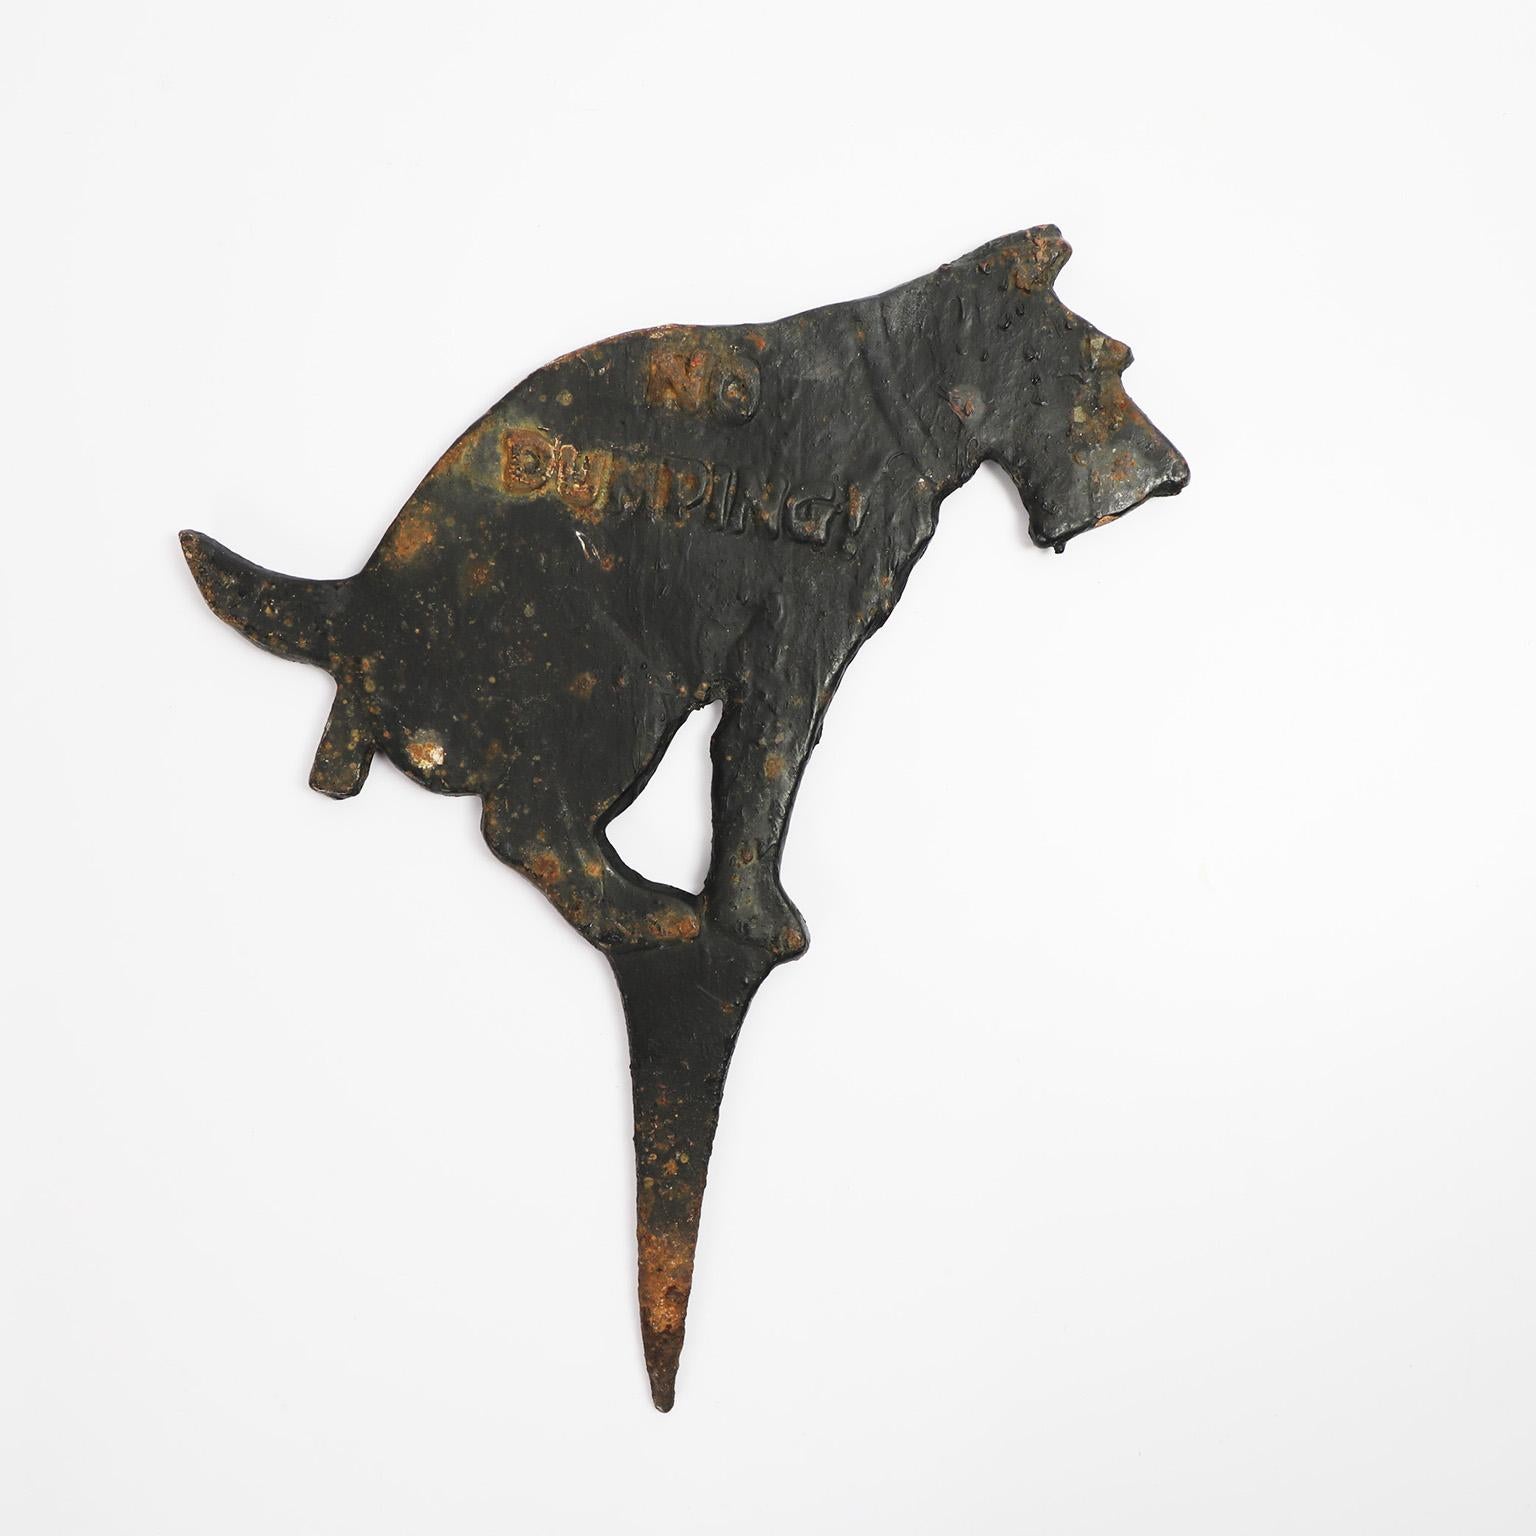 We offer this original Vintage Heavy Cast Iron Dog Lawn Sign. Made in iron with great patina